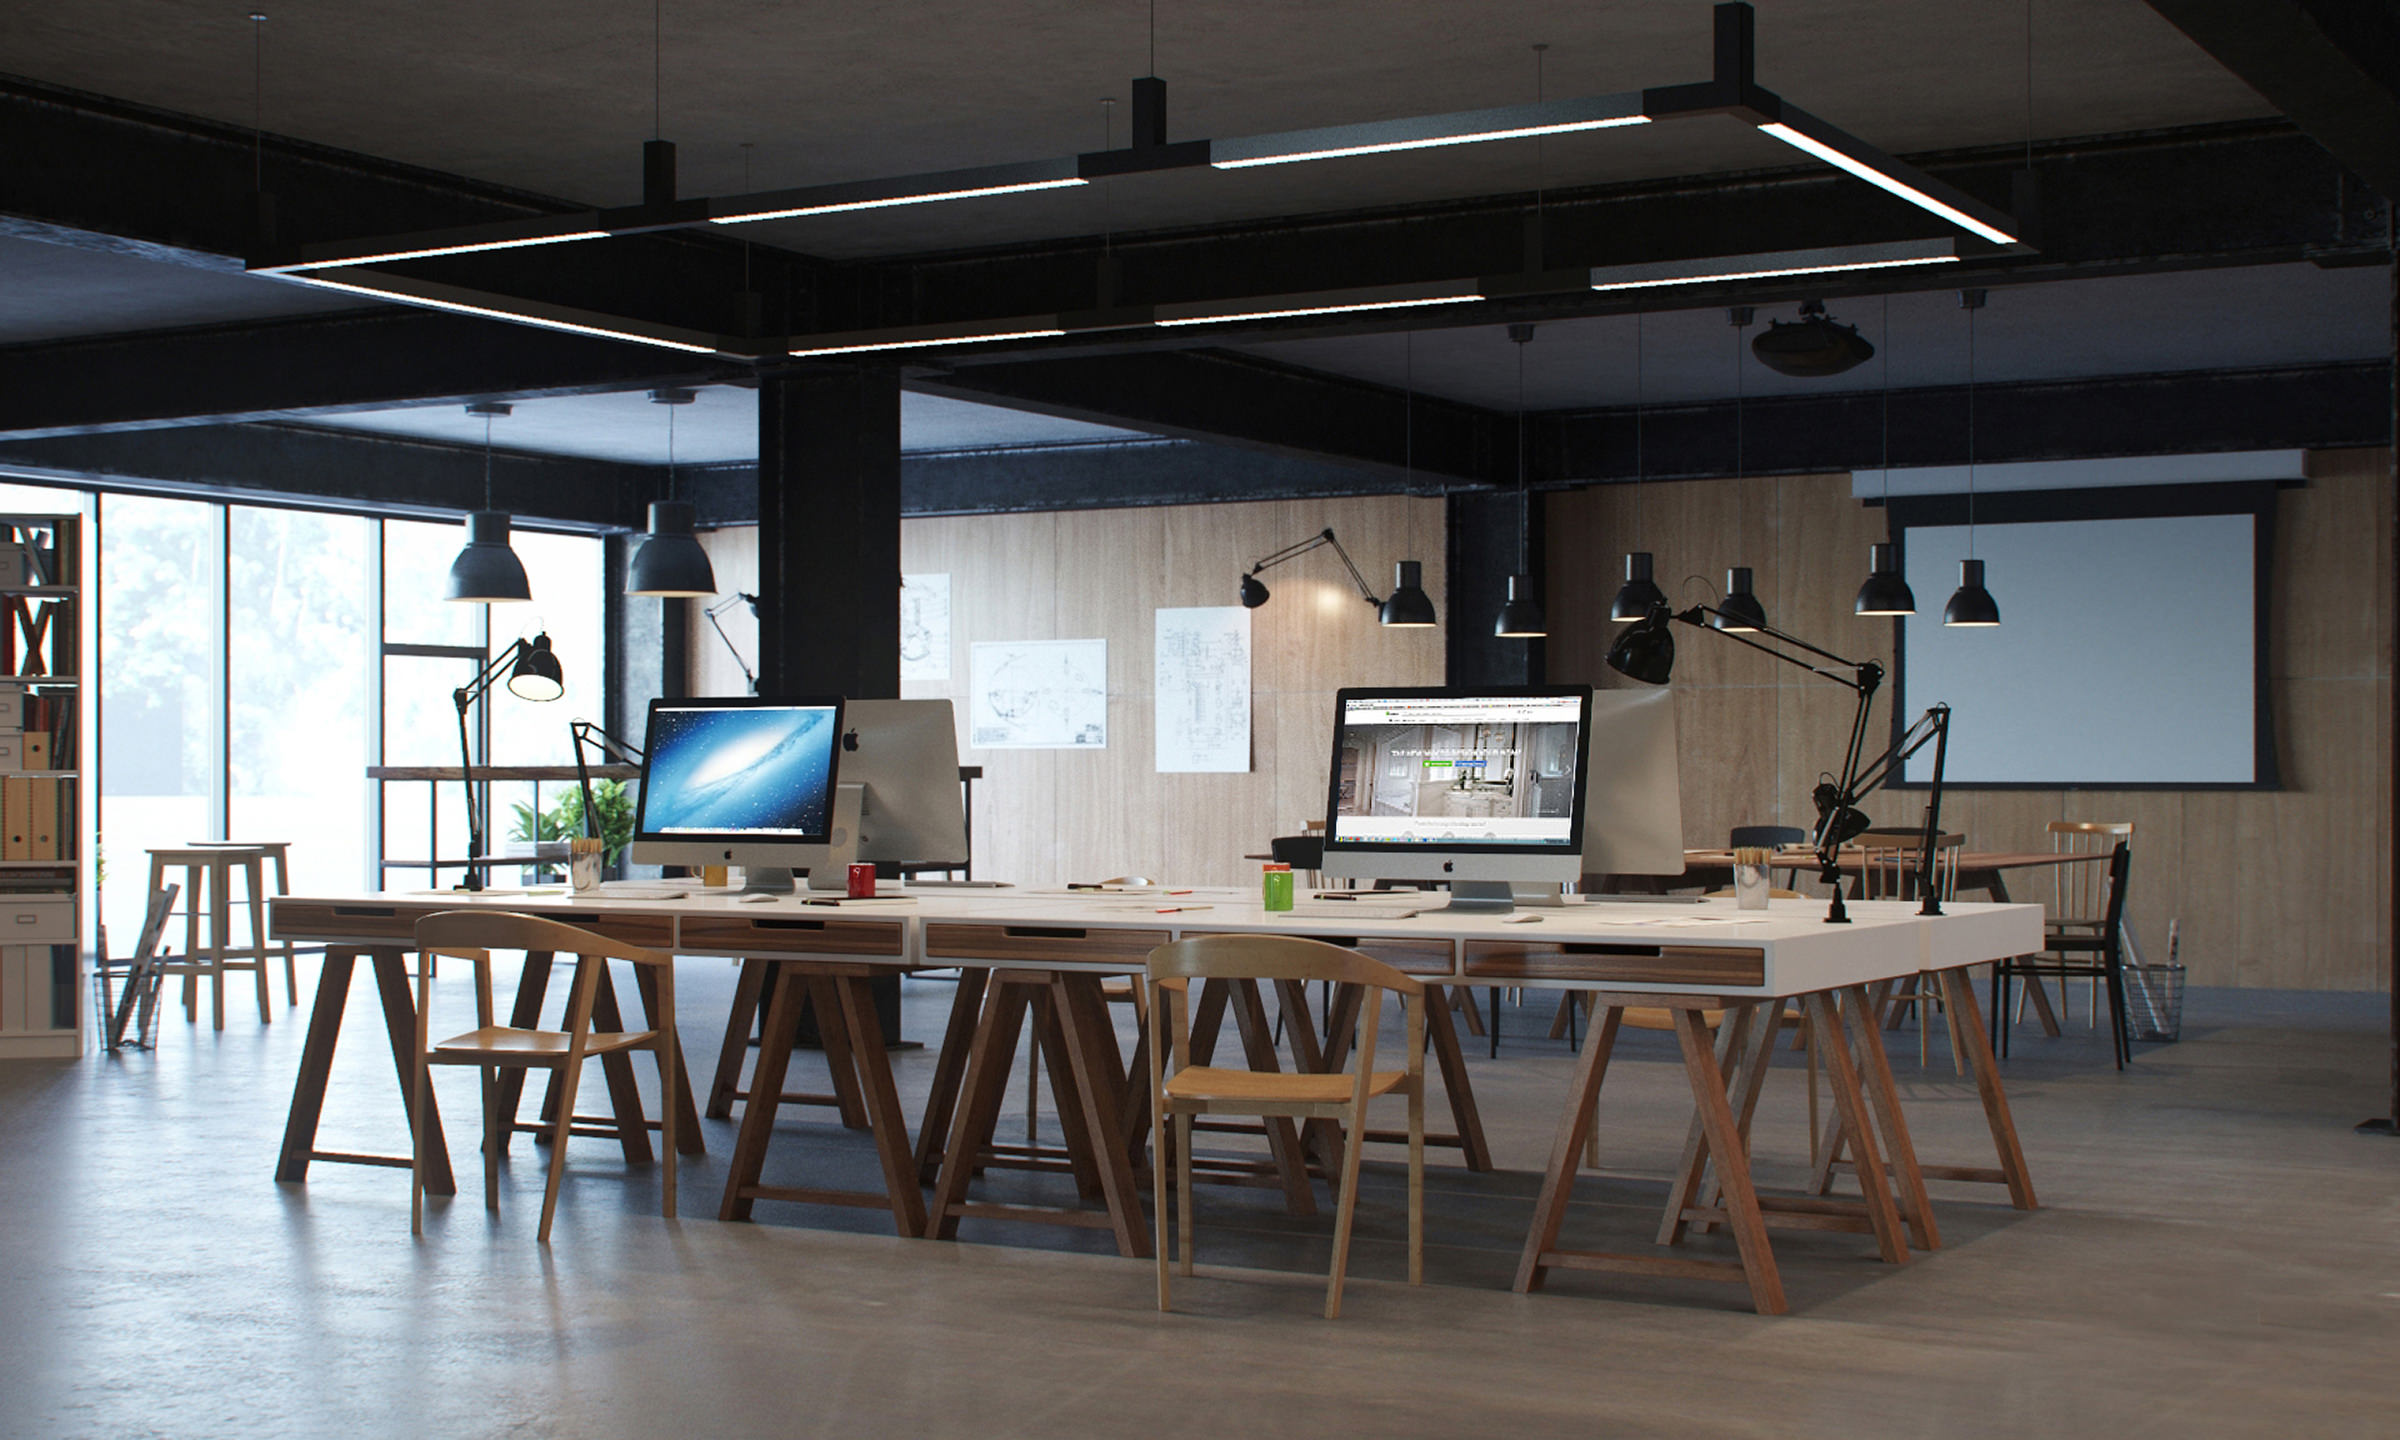 Photorealistic 3D render of a modern bright workspace with Mac computers and a coworking space